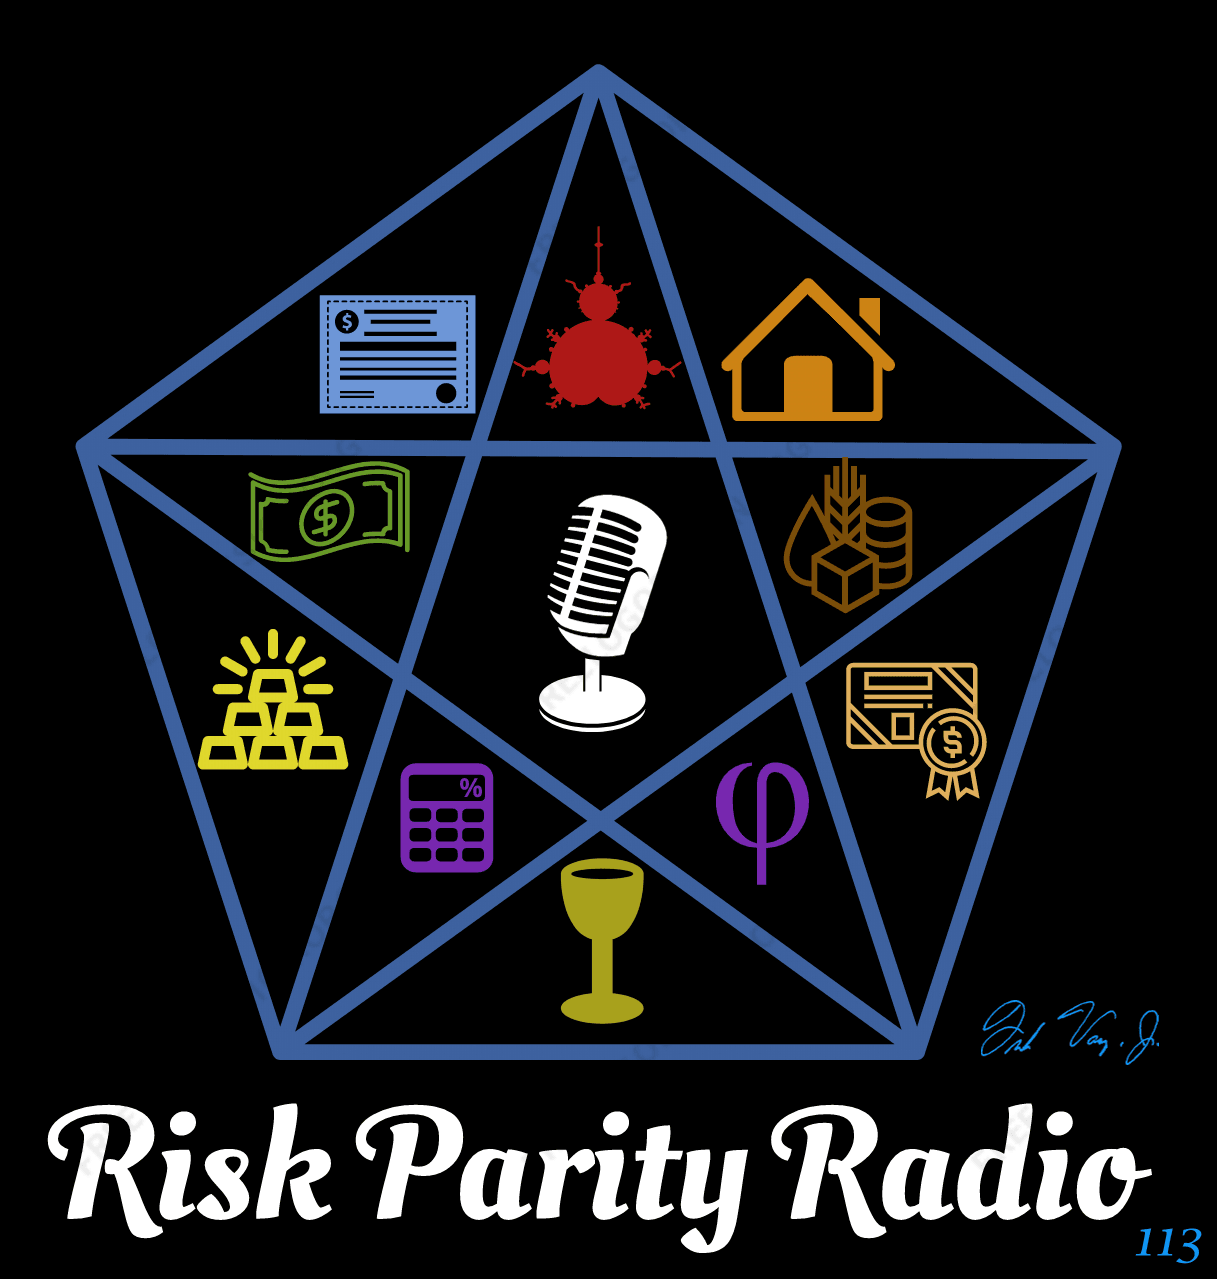 Limited Edition Risk Parity Radio Autographed Print #113